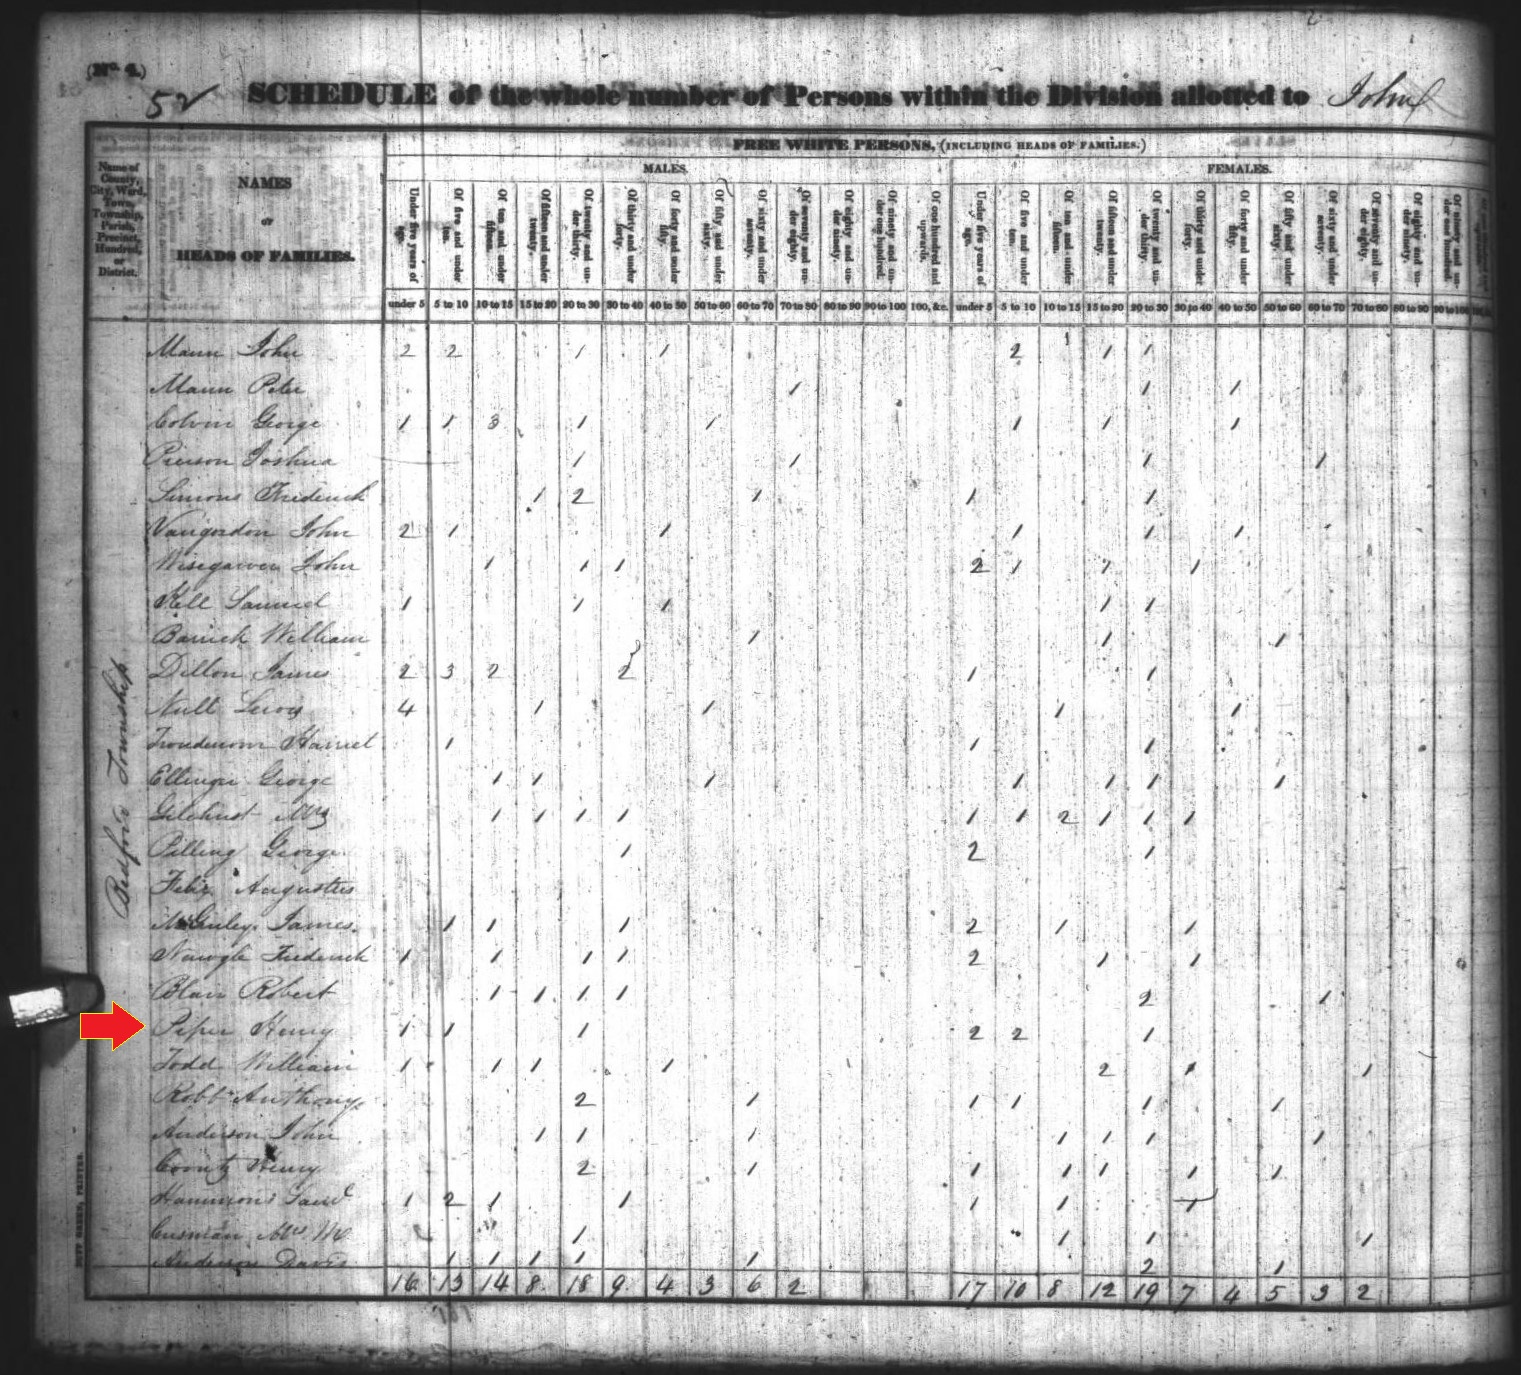 Henry Piper in the 1830 census records of Bedford County, Pennsylvania.